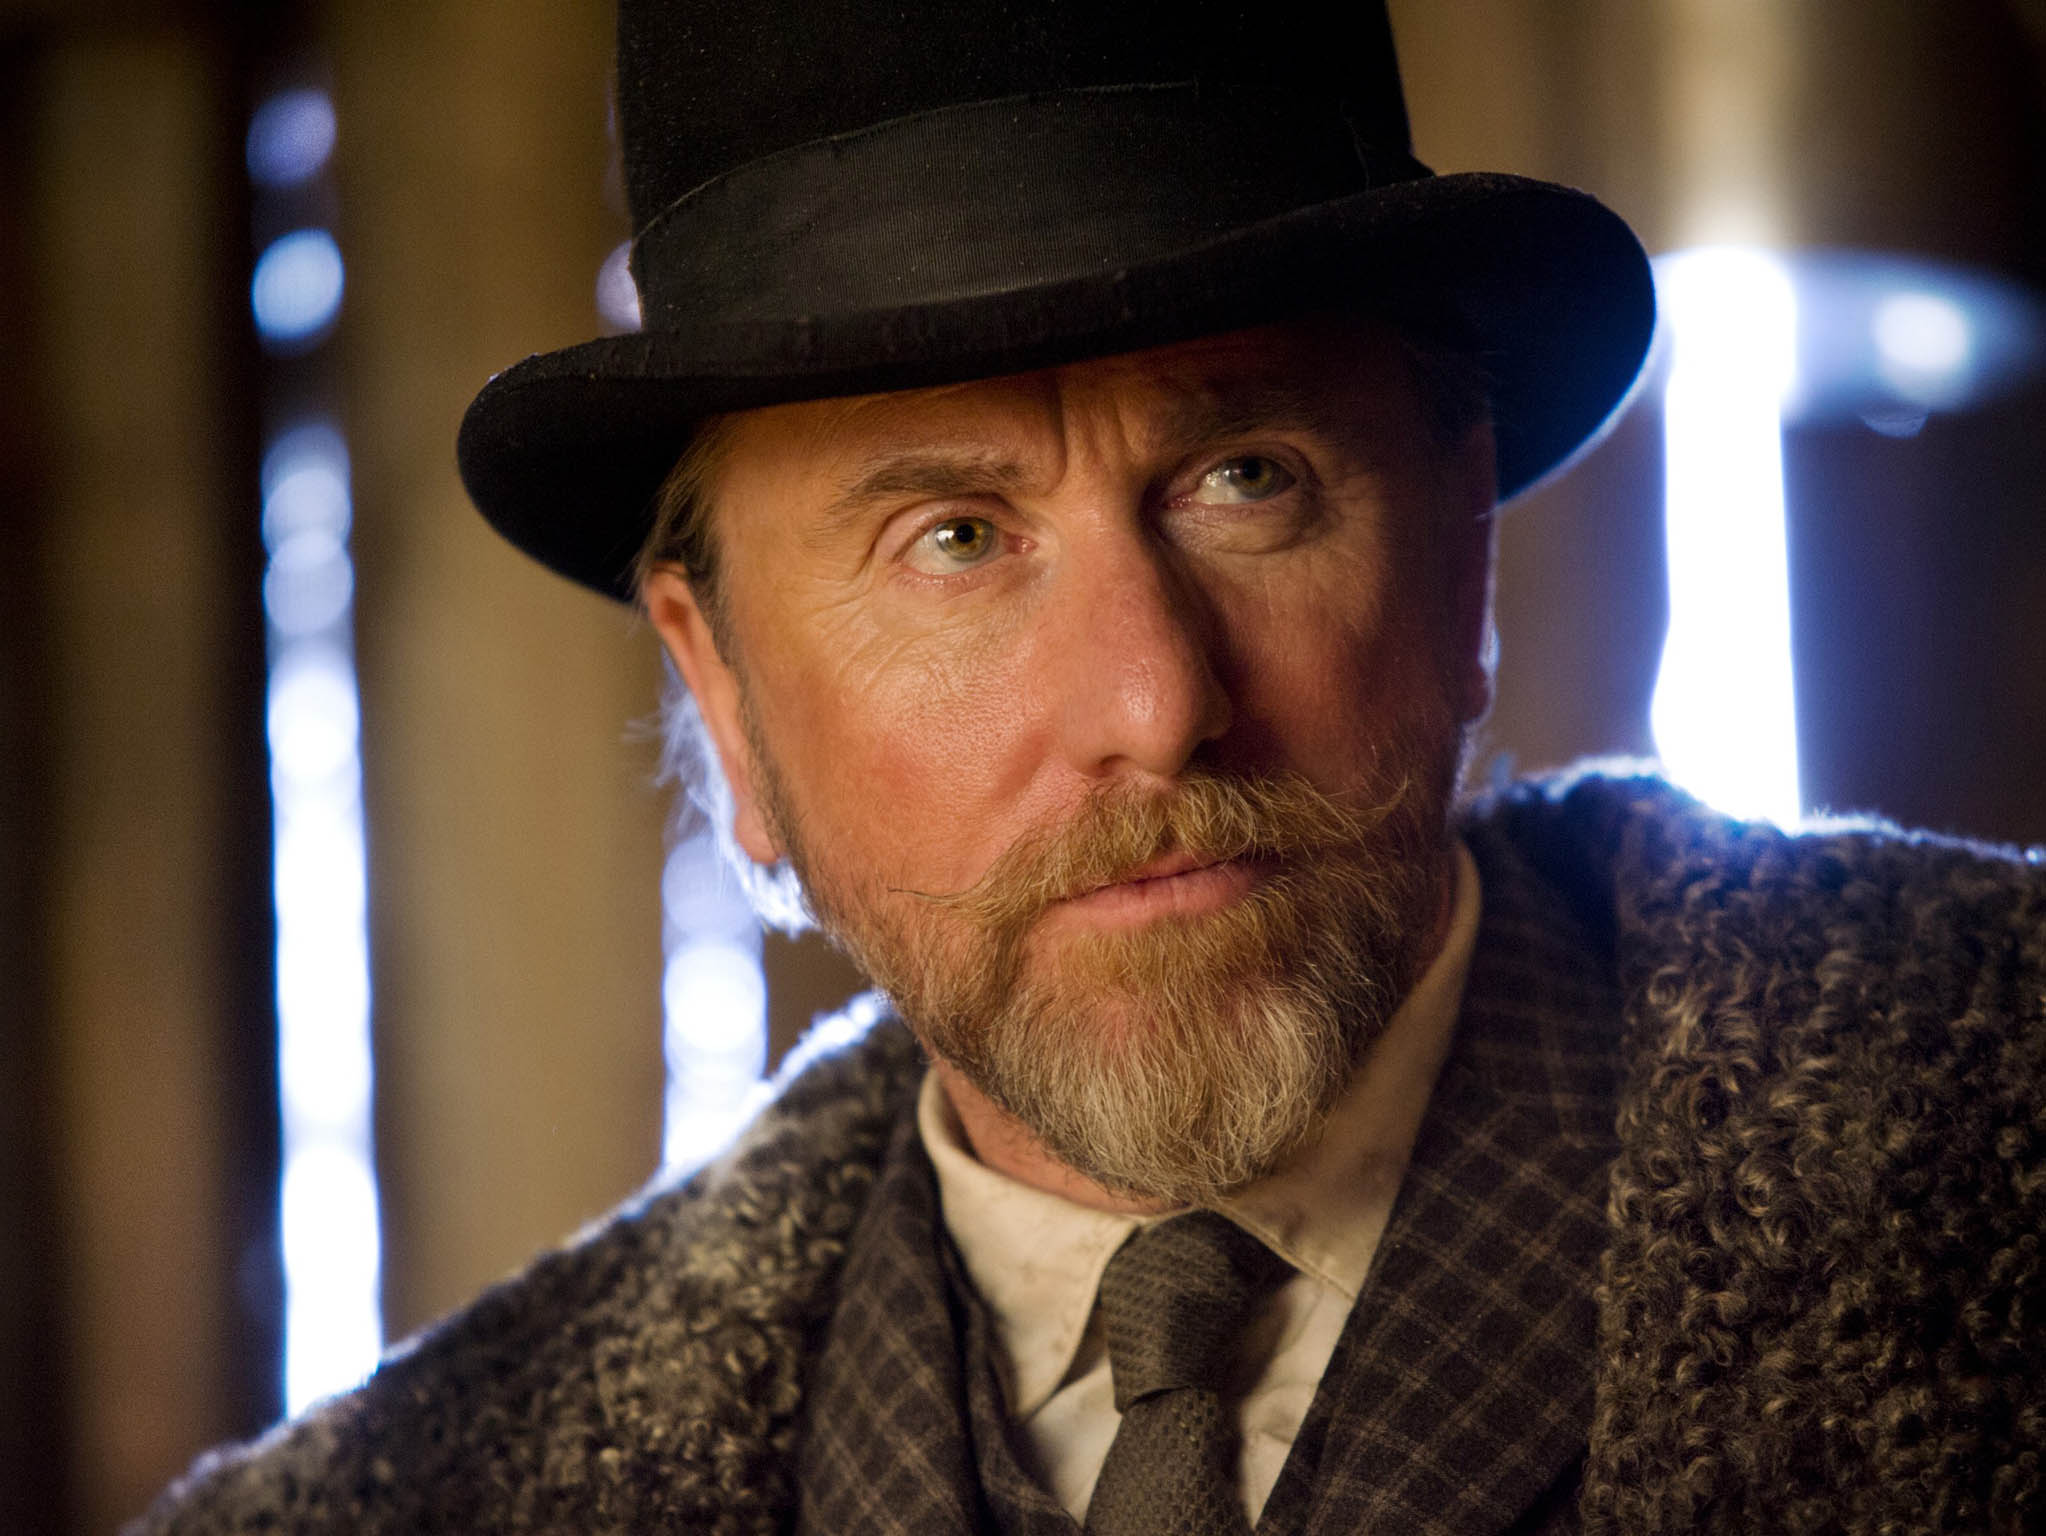 Tim Roth looks as if he is on leave from a Lucky Luke comic book as the dapper, well-spoken Englishman